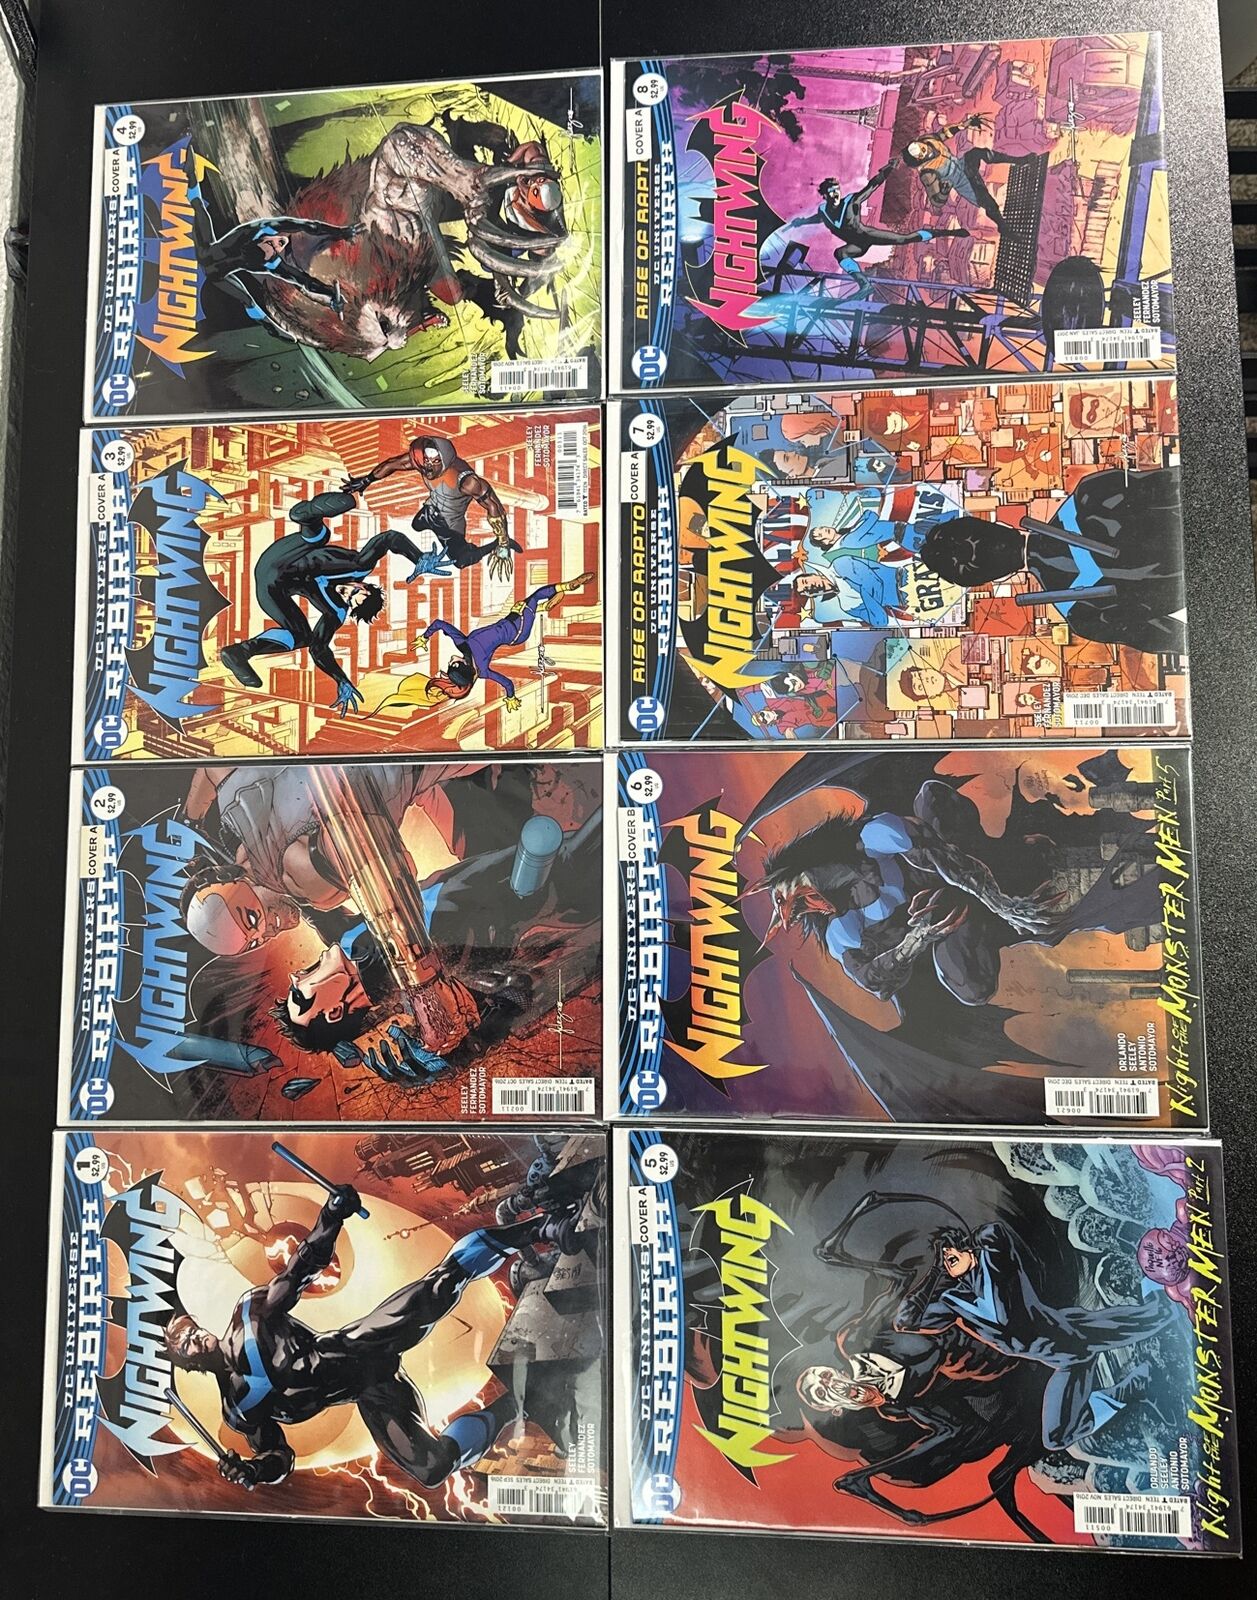 Nightwing Volume 4 Huge Lot of 106 Key Issues Variants Excellent Condition